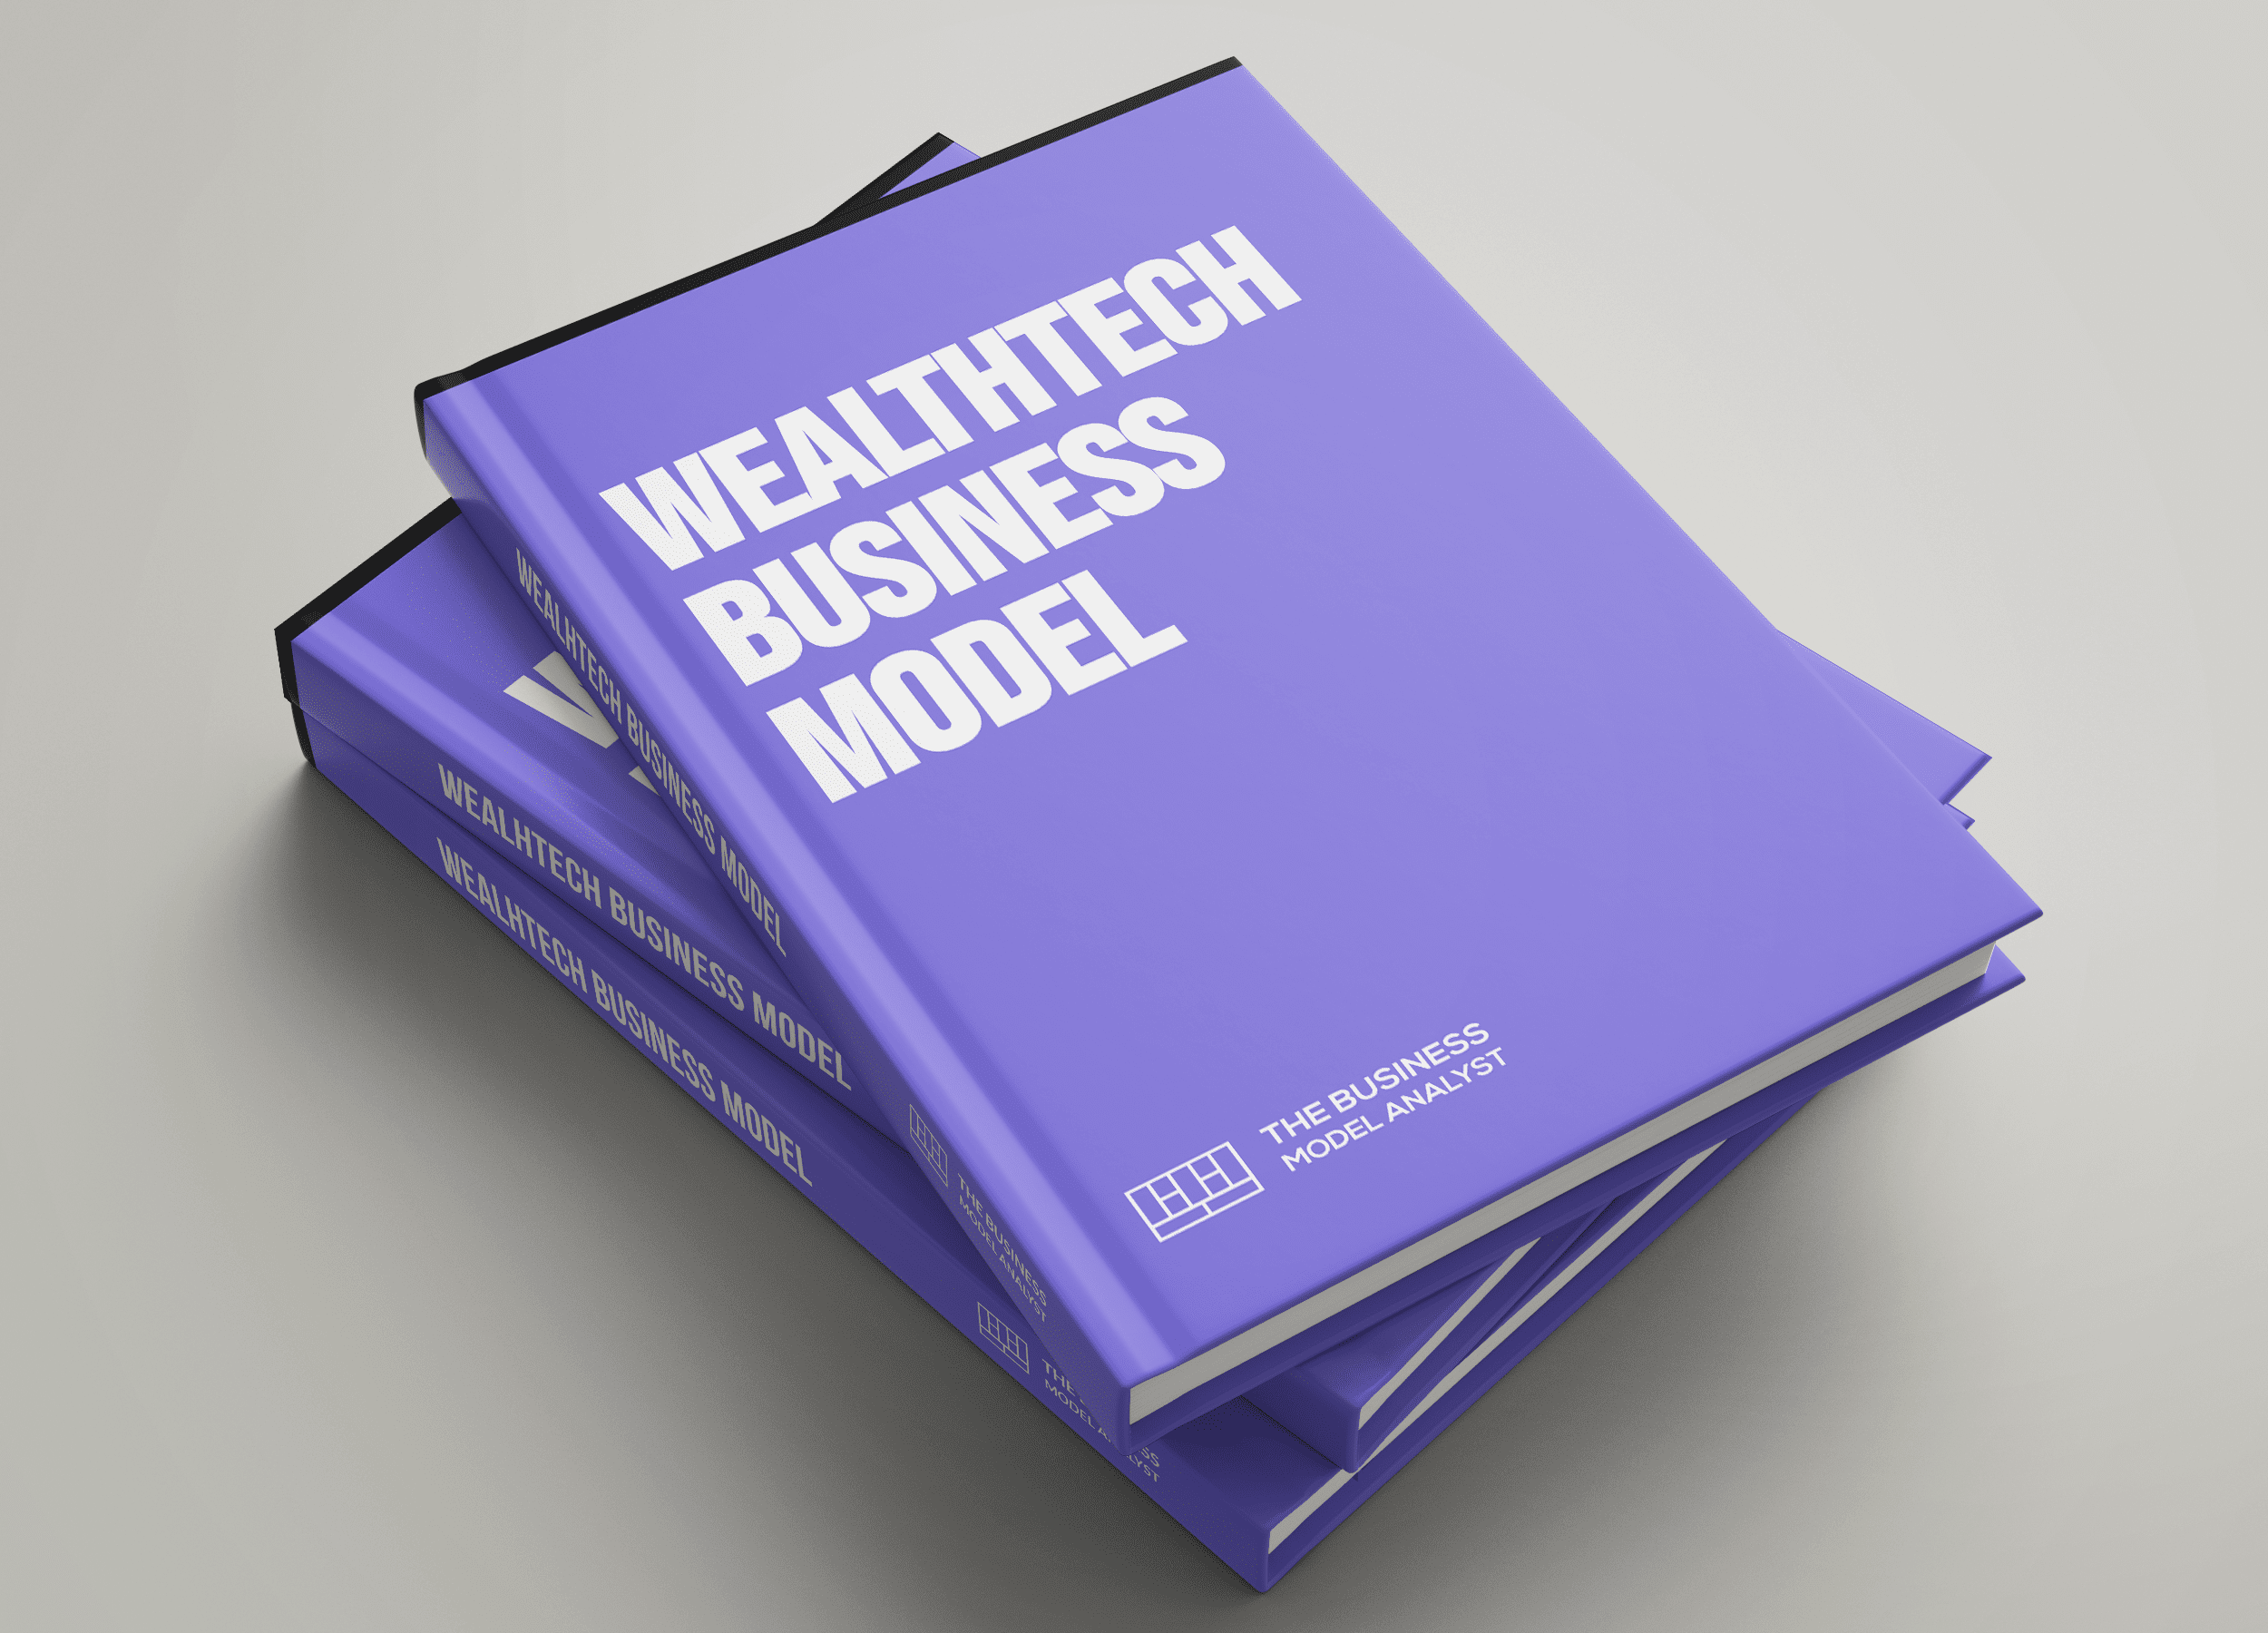 Wealthtech Business Model Covers